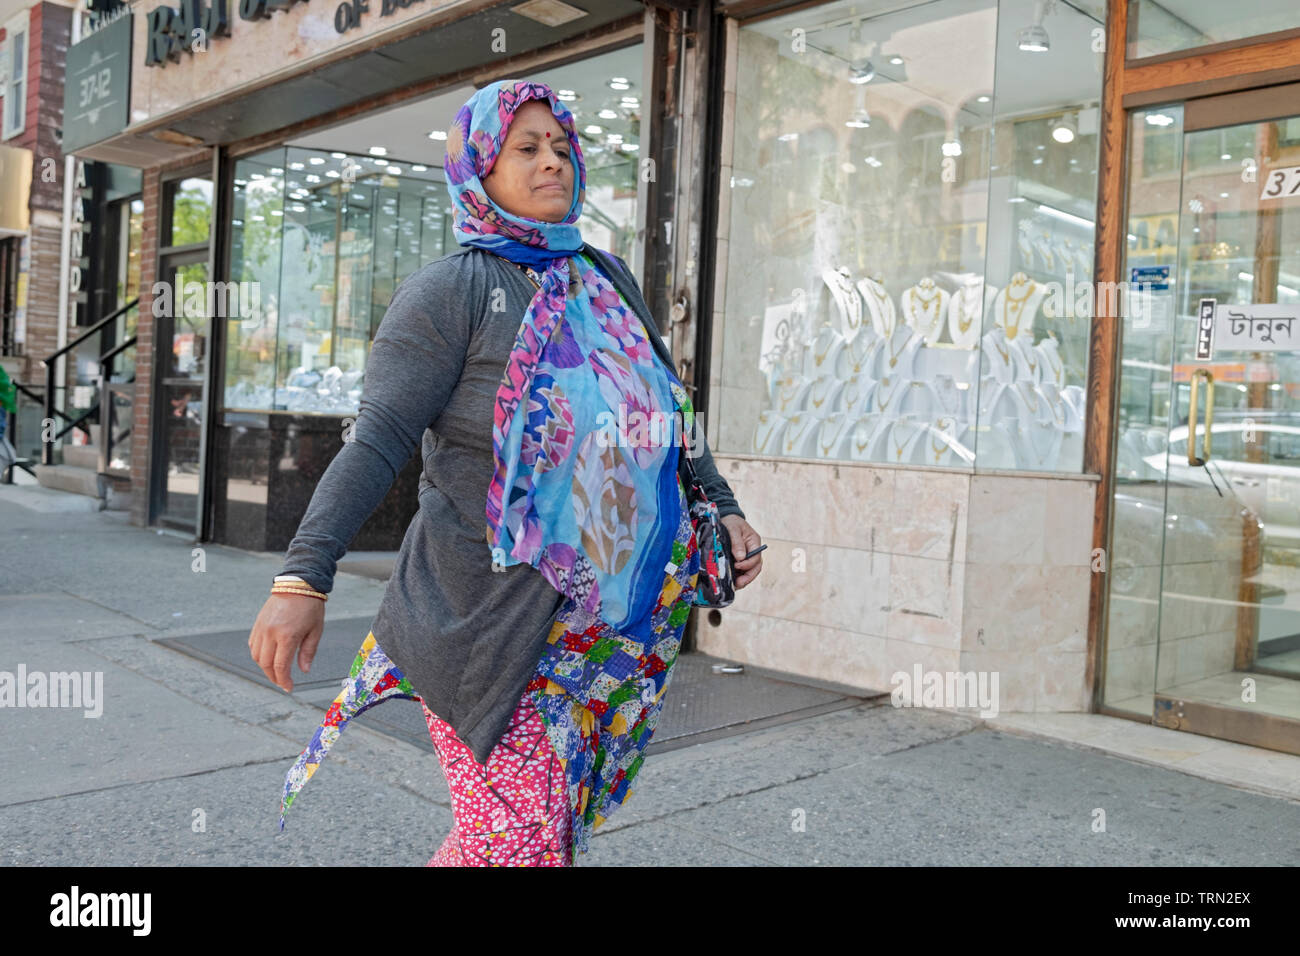 A woman in a colorful dress and head covering walks on 74th Street in Jackson Heights absorbed in her thoughts. Queens, New York City. Stock Photo